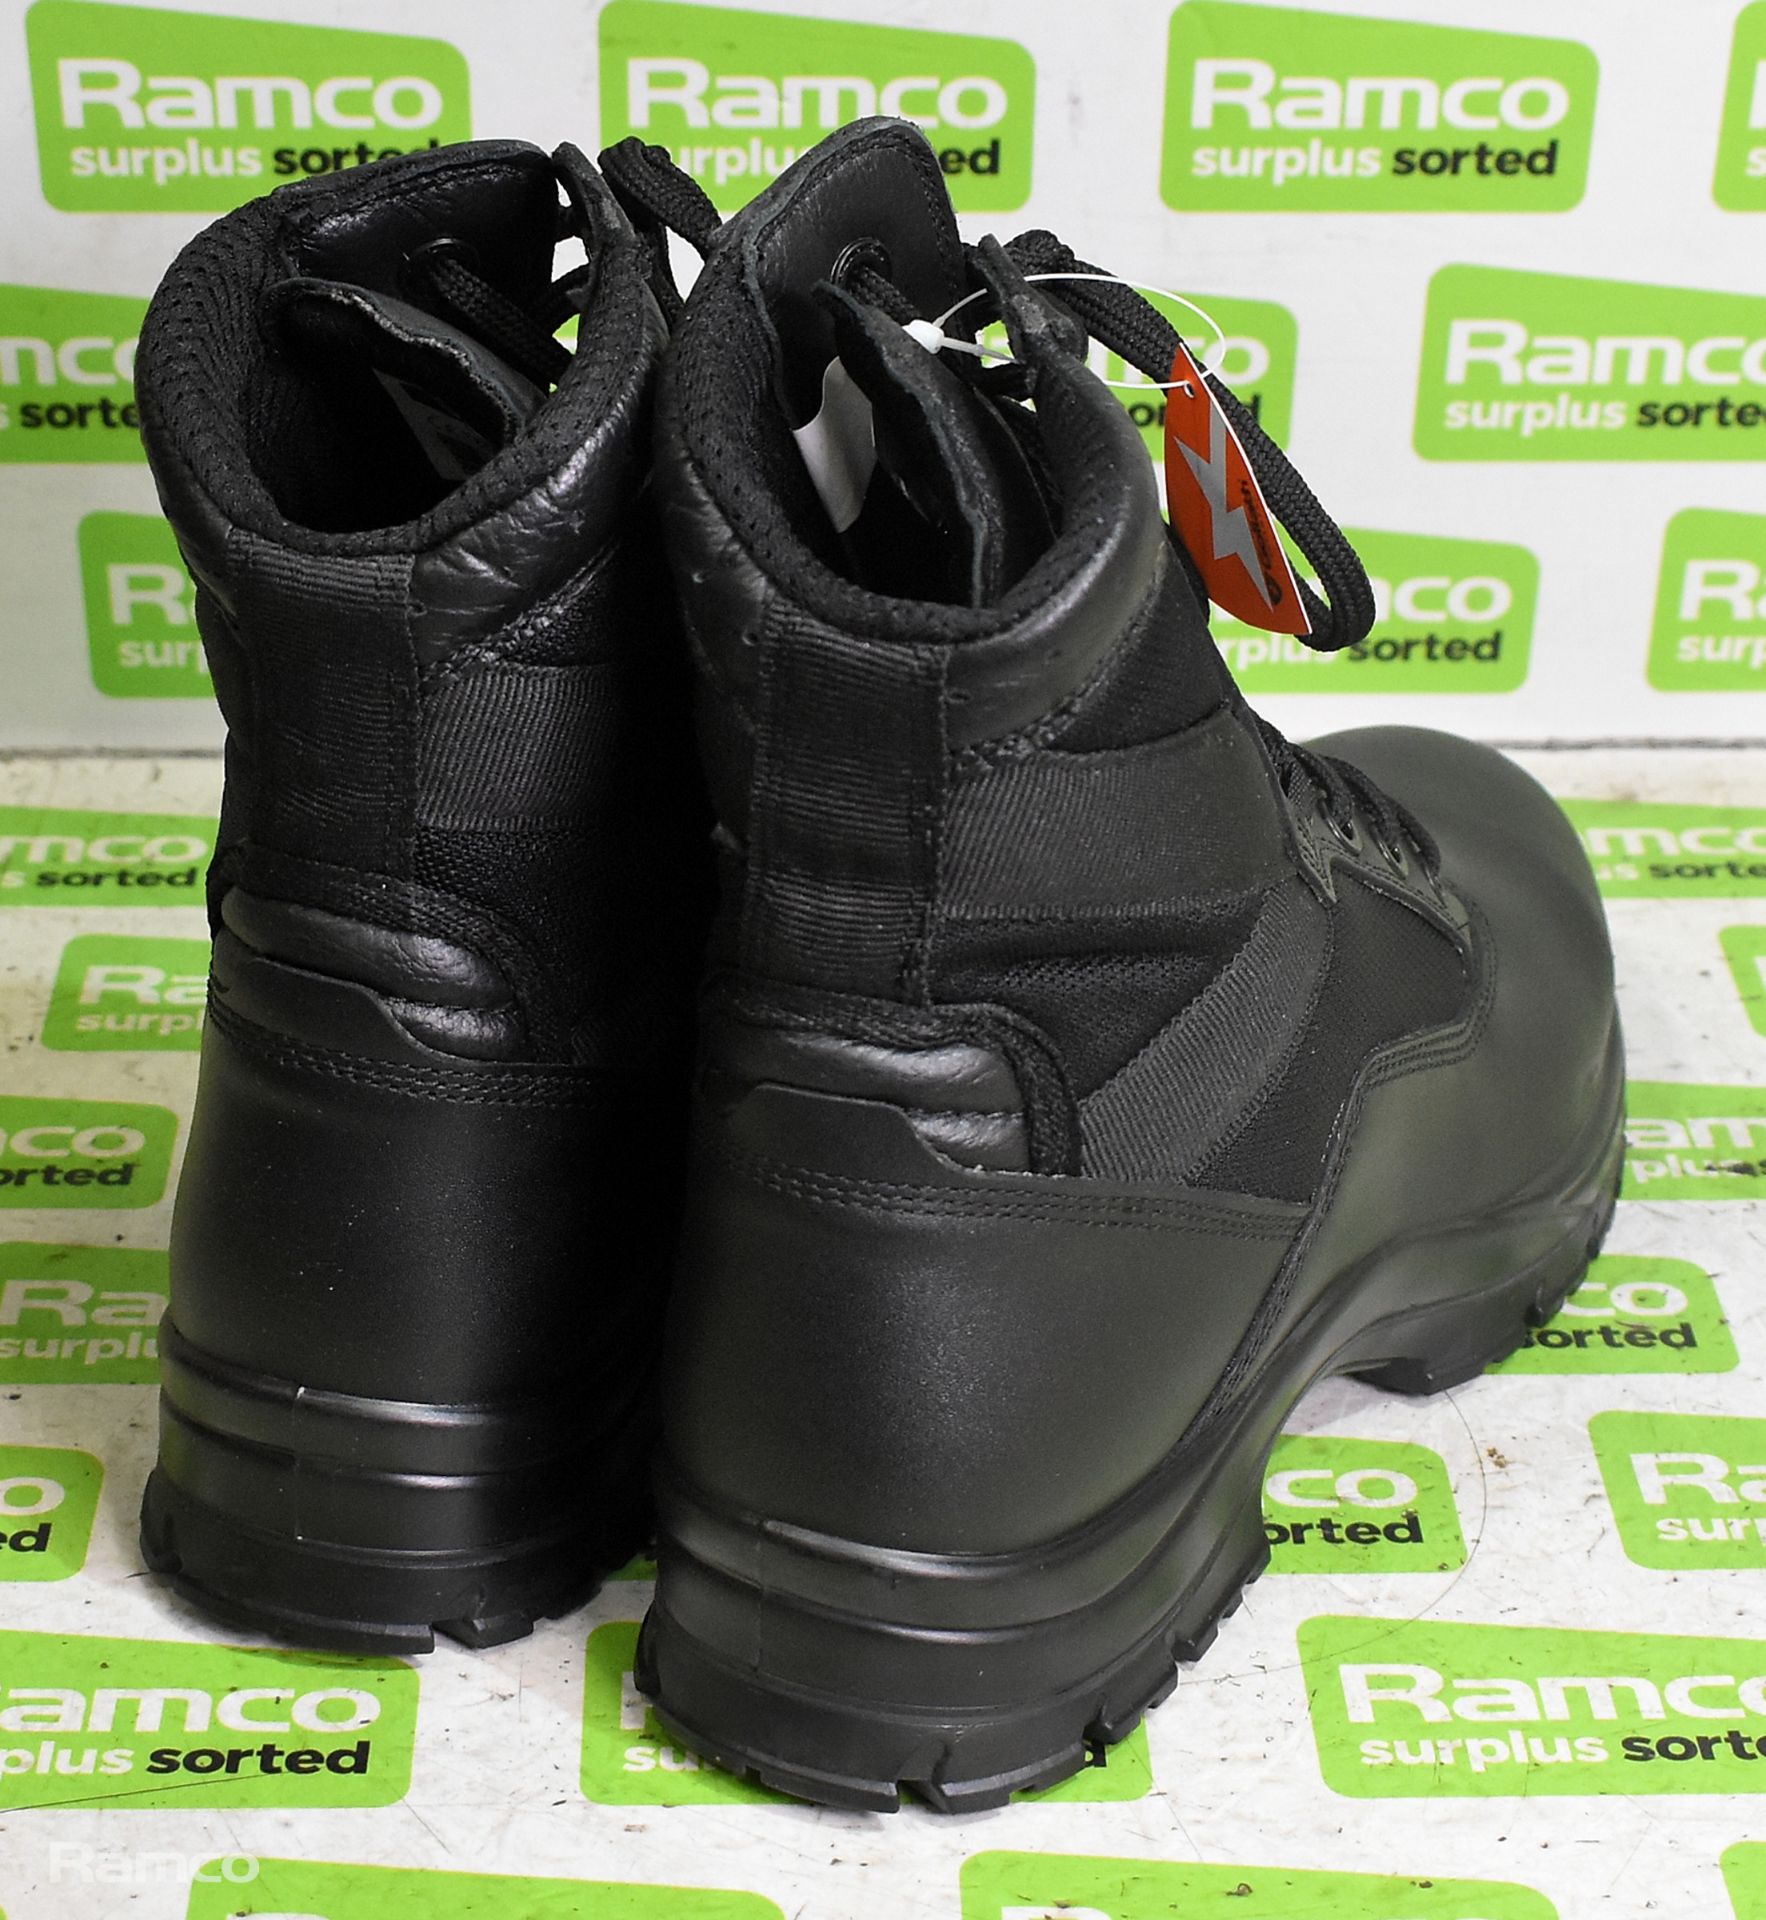 9x pairs of Goliath warm weather boots - Size 9L - Image 3 of 6